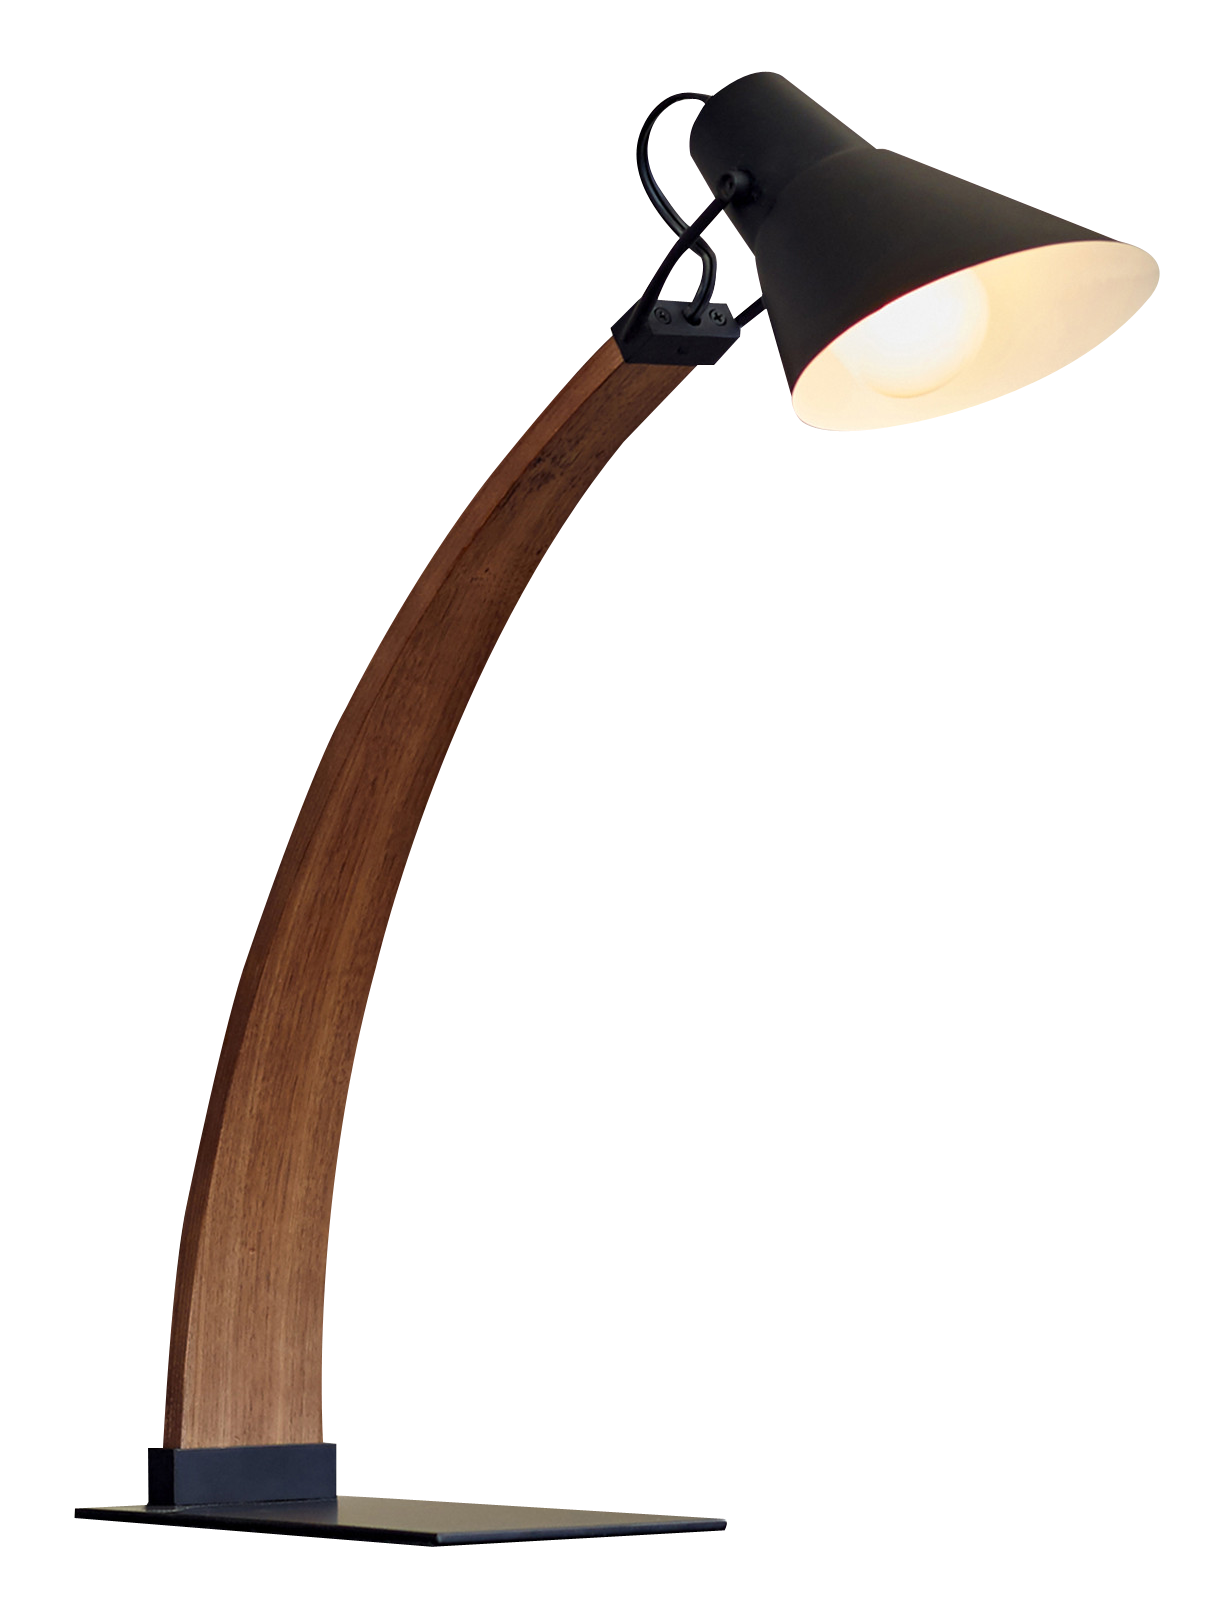 Download Table Lamp Png Image For Free